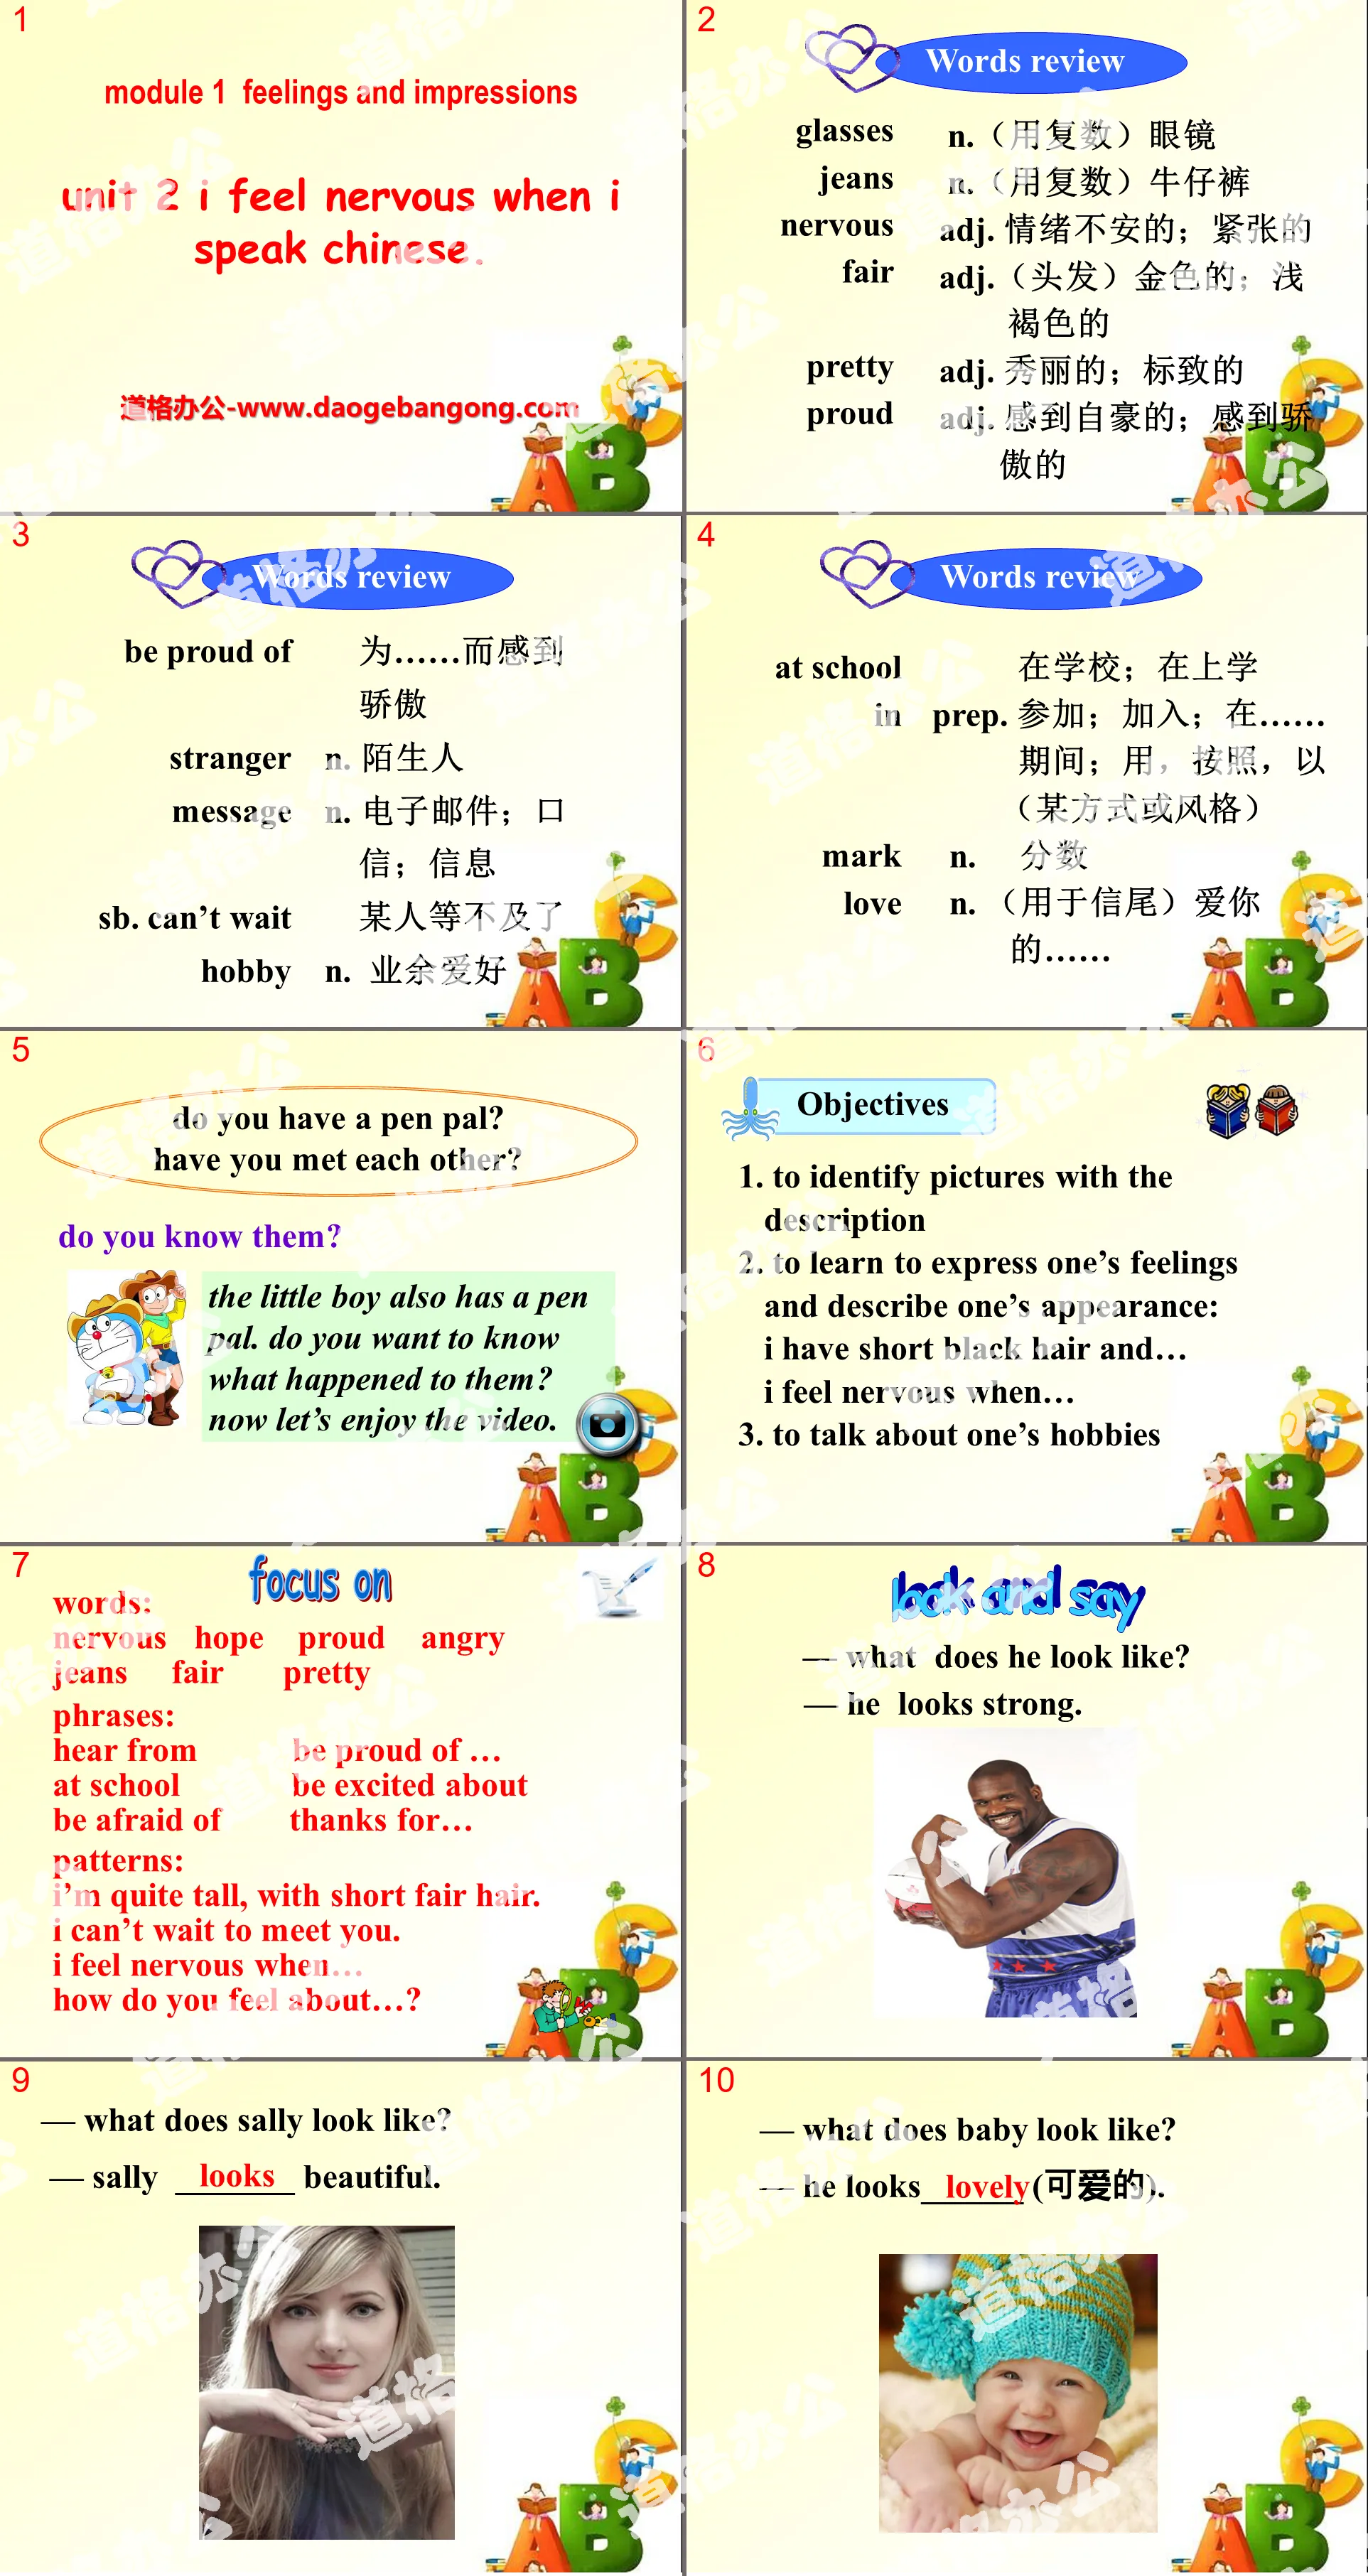 "I feel nervous when I speak Chinese" Feelings and impressions PPT courseware 2